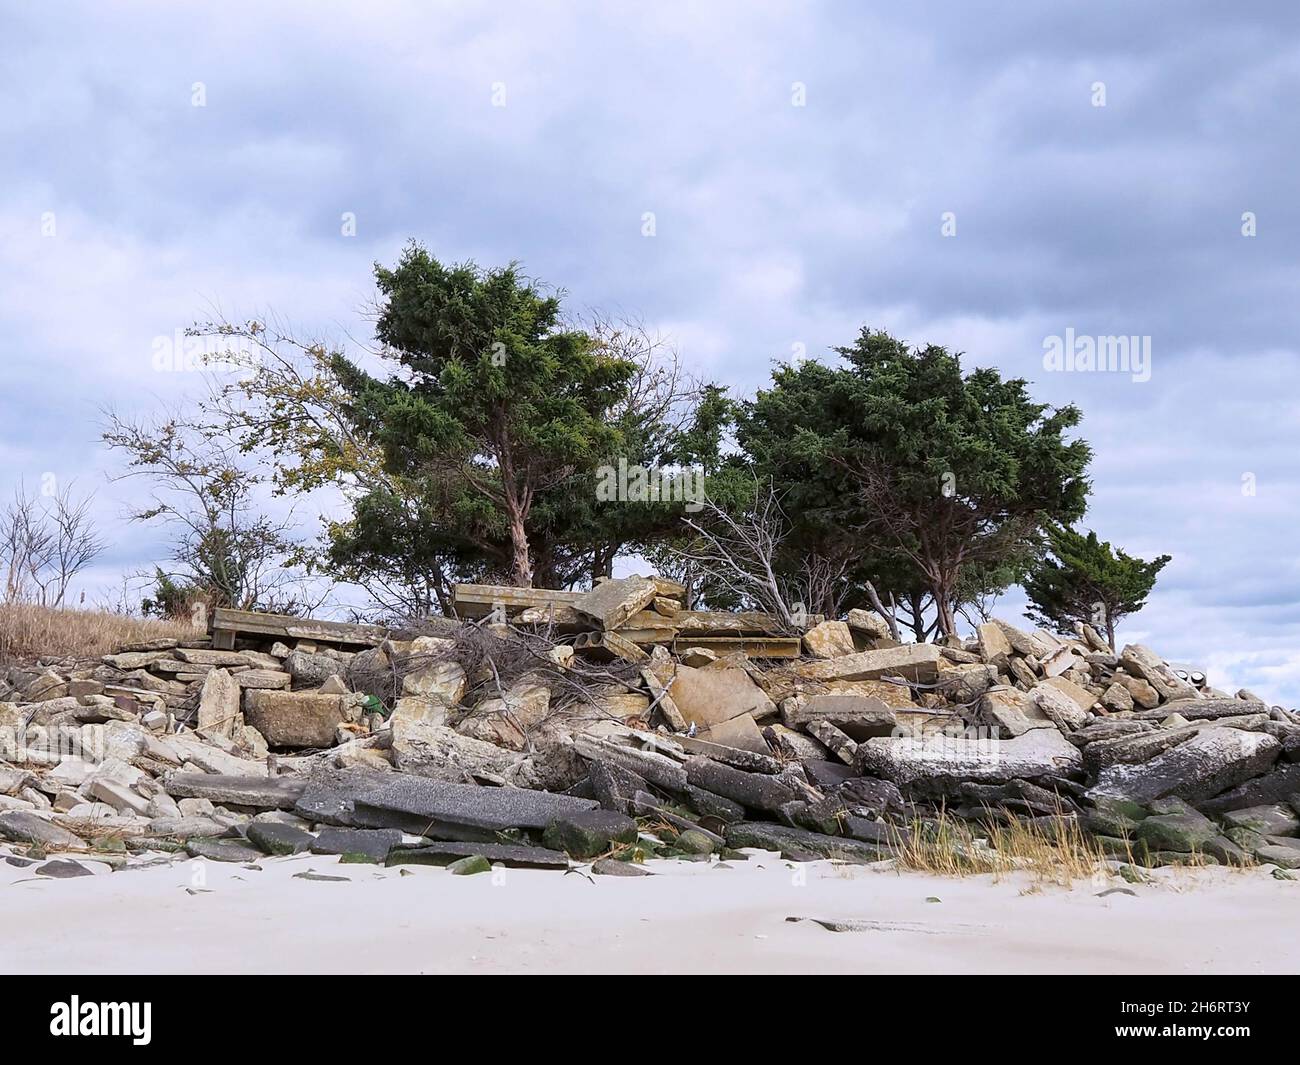 A small grouping of windblown Loblolly Pine trees grows out of a heaping pile of old concrete, asphalt and other demolished construction material on a Stock Photo